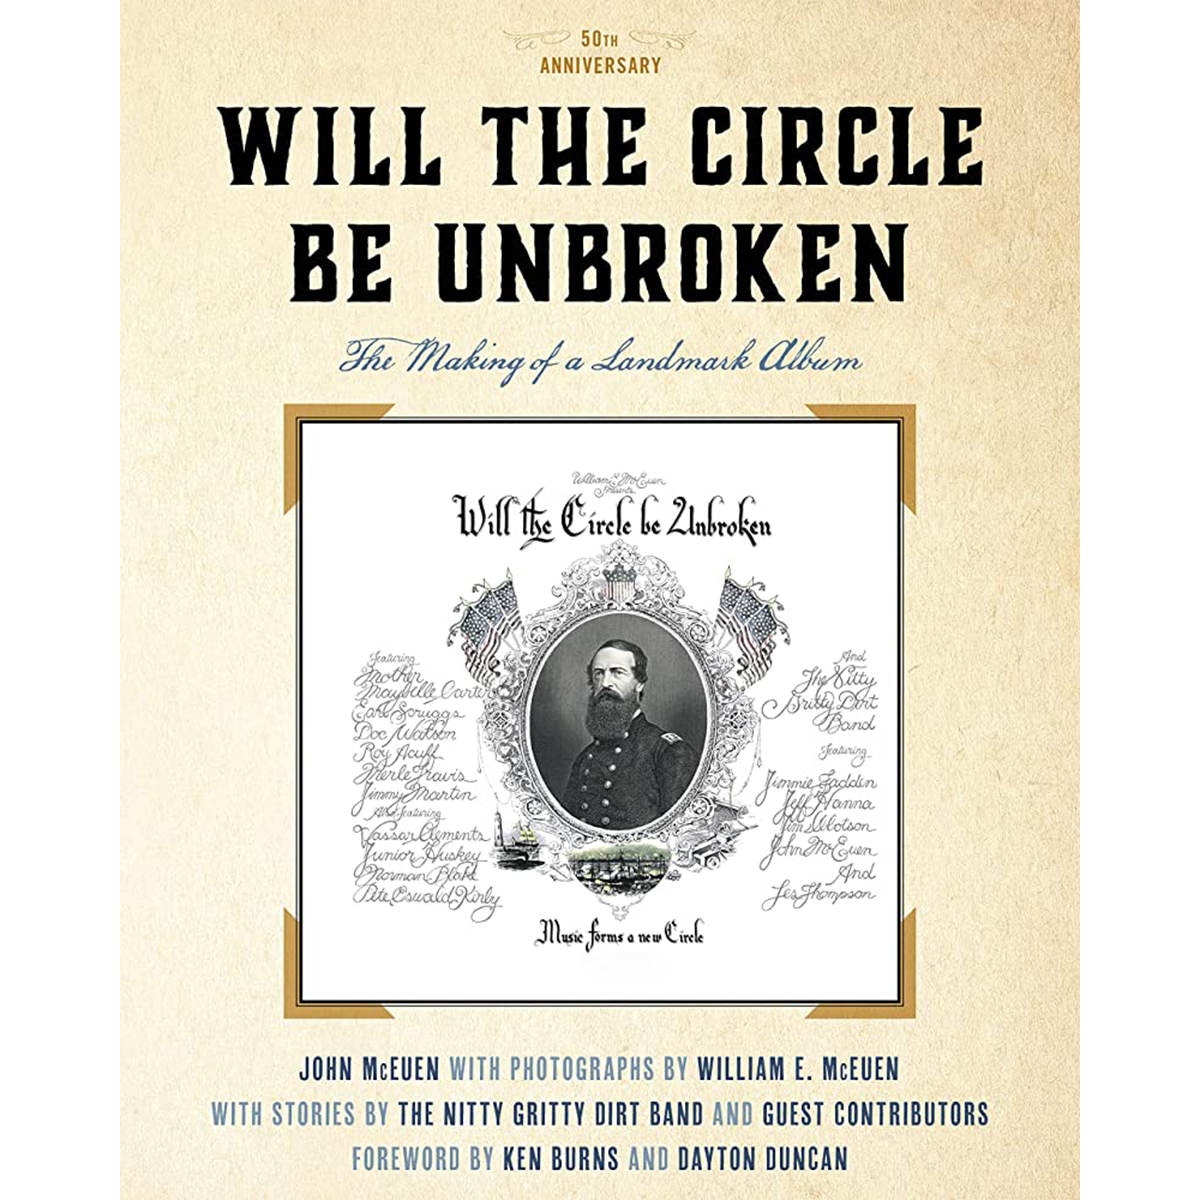 *Signed* Will The Circle Be Unbroken: The Making of a Landmark Album, 50th Anniversary Book